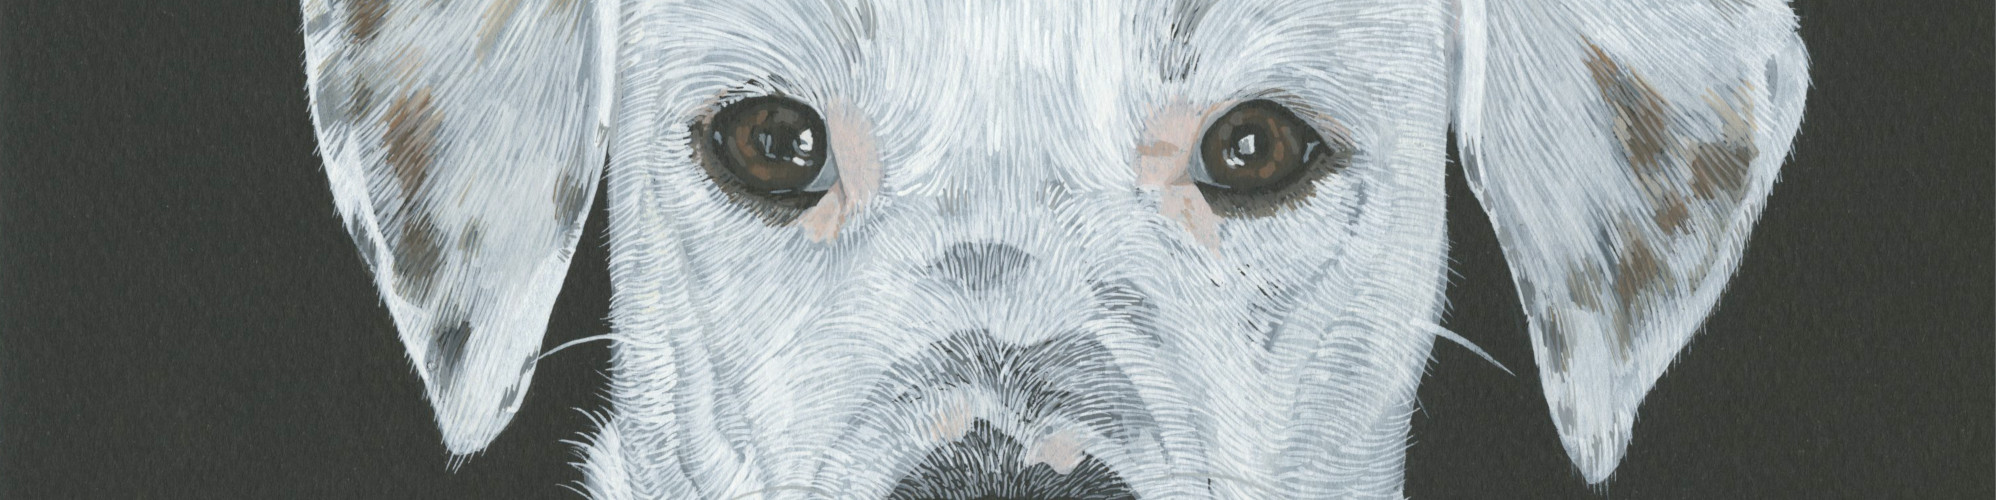 Portion of a dog portrait. Big black eyes stare out from a white-furred face.